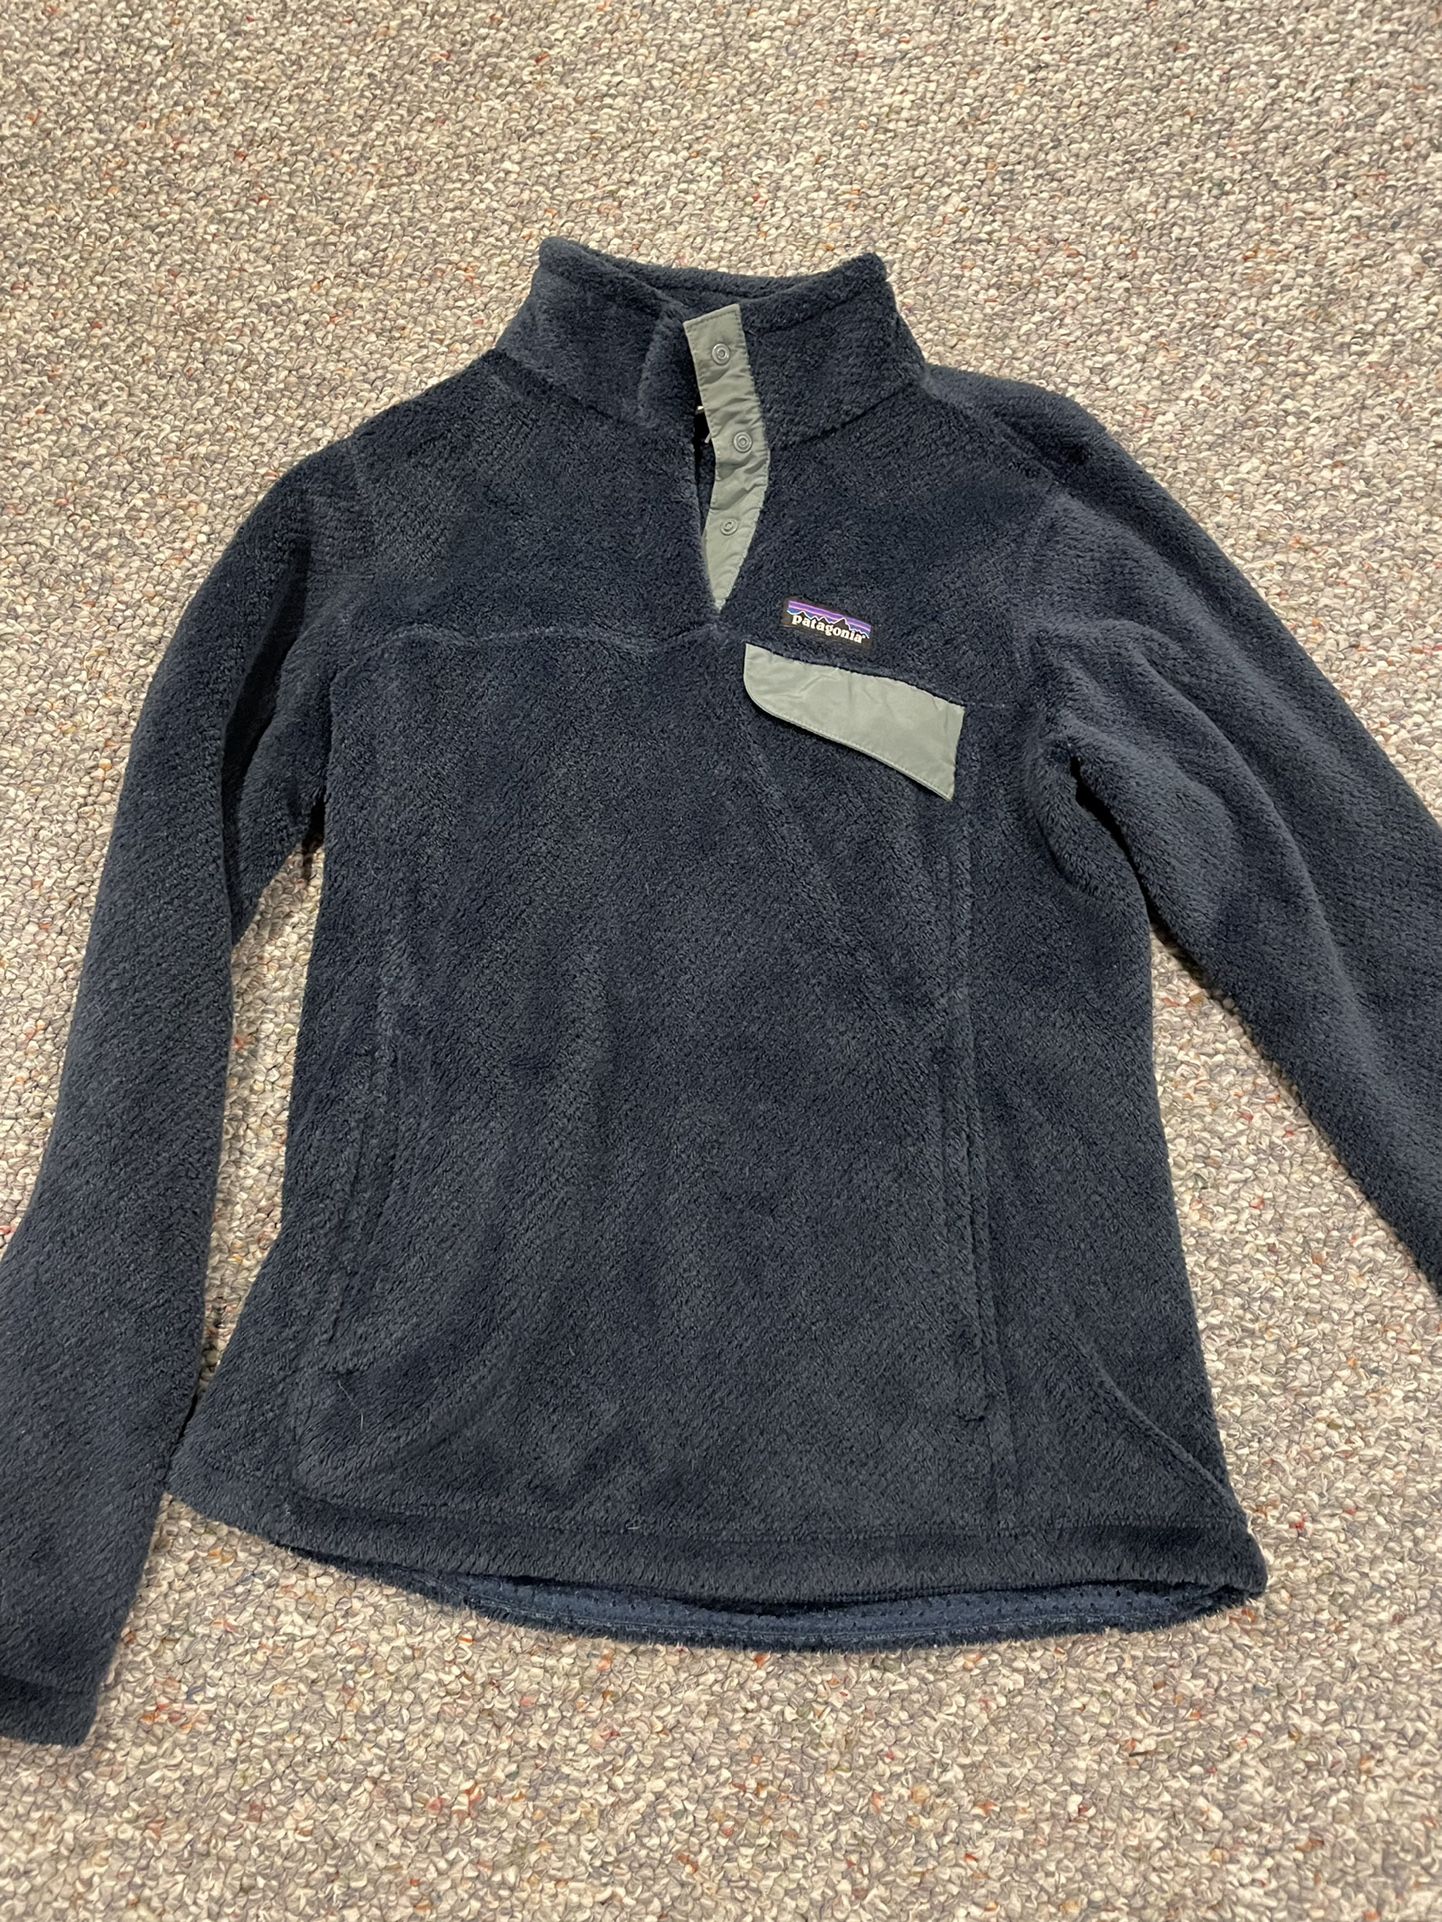 Patagonia Re-tool Snap-T Pullover, Women’s Small, Stone Blue Classic Navy